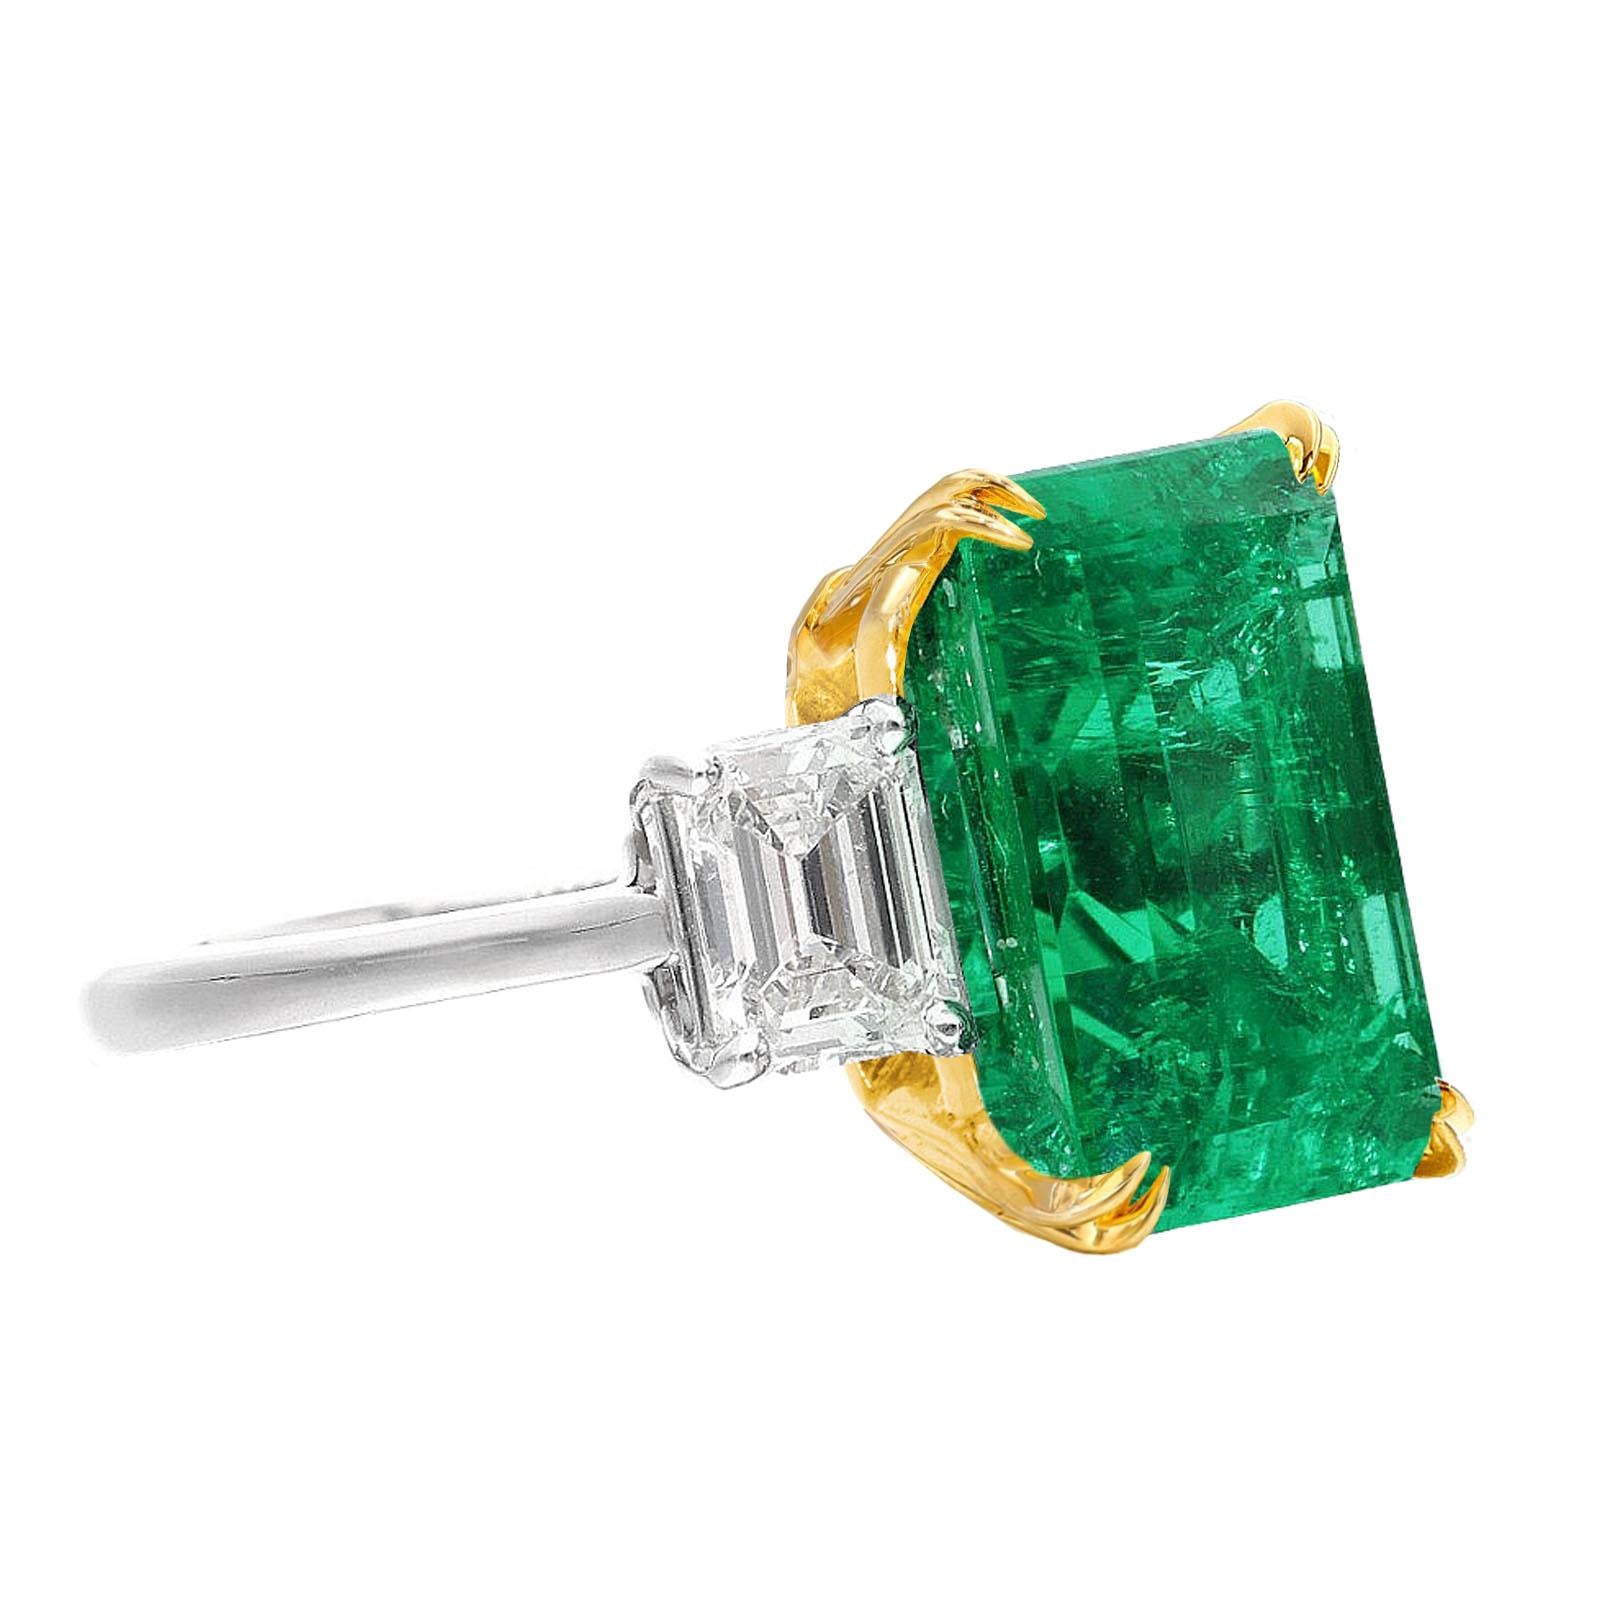 Substantial 13.30ct size natural emerald

- High quality!

- AGL certified

- Gorgeous rich green color



